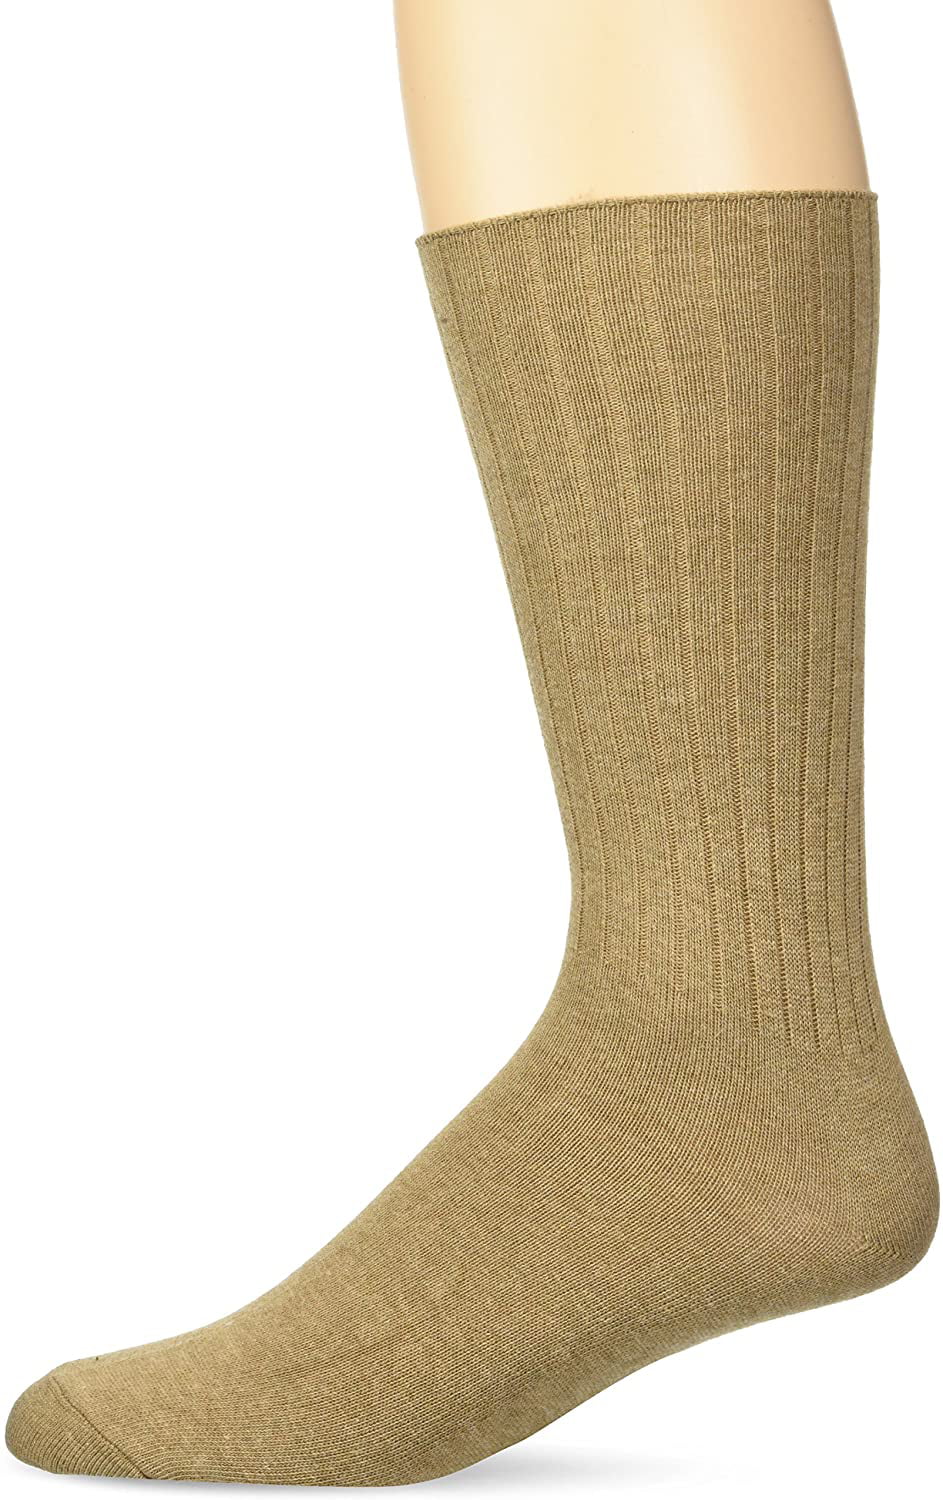 Chaps Mens Assorted Solid Dress Crew Socks 3 Pack 